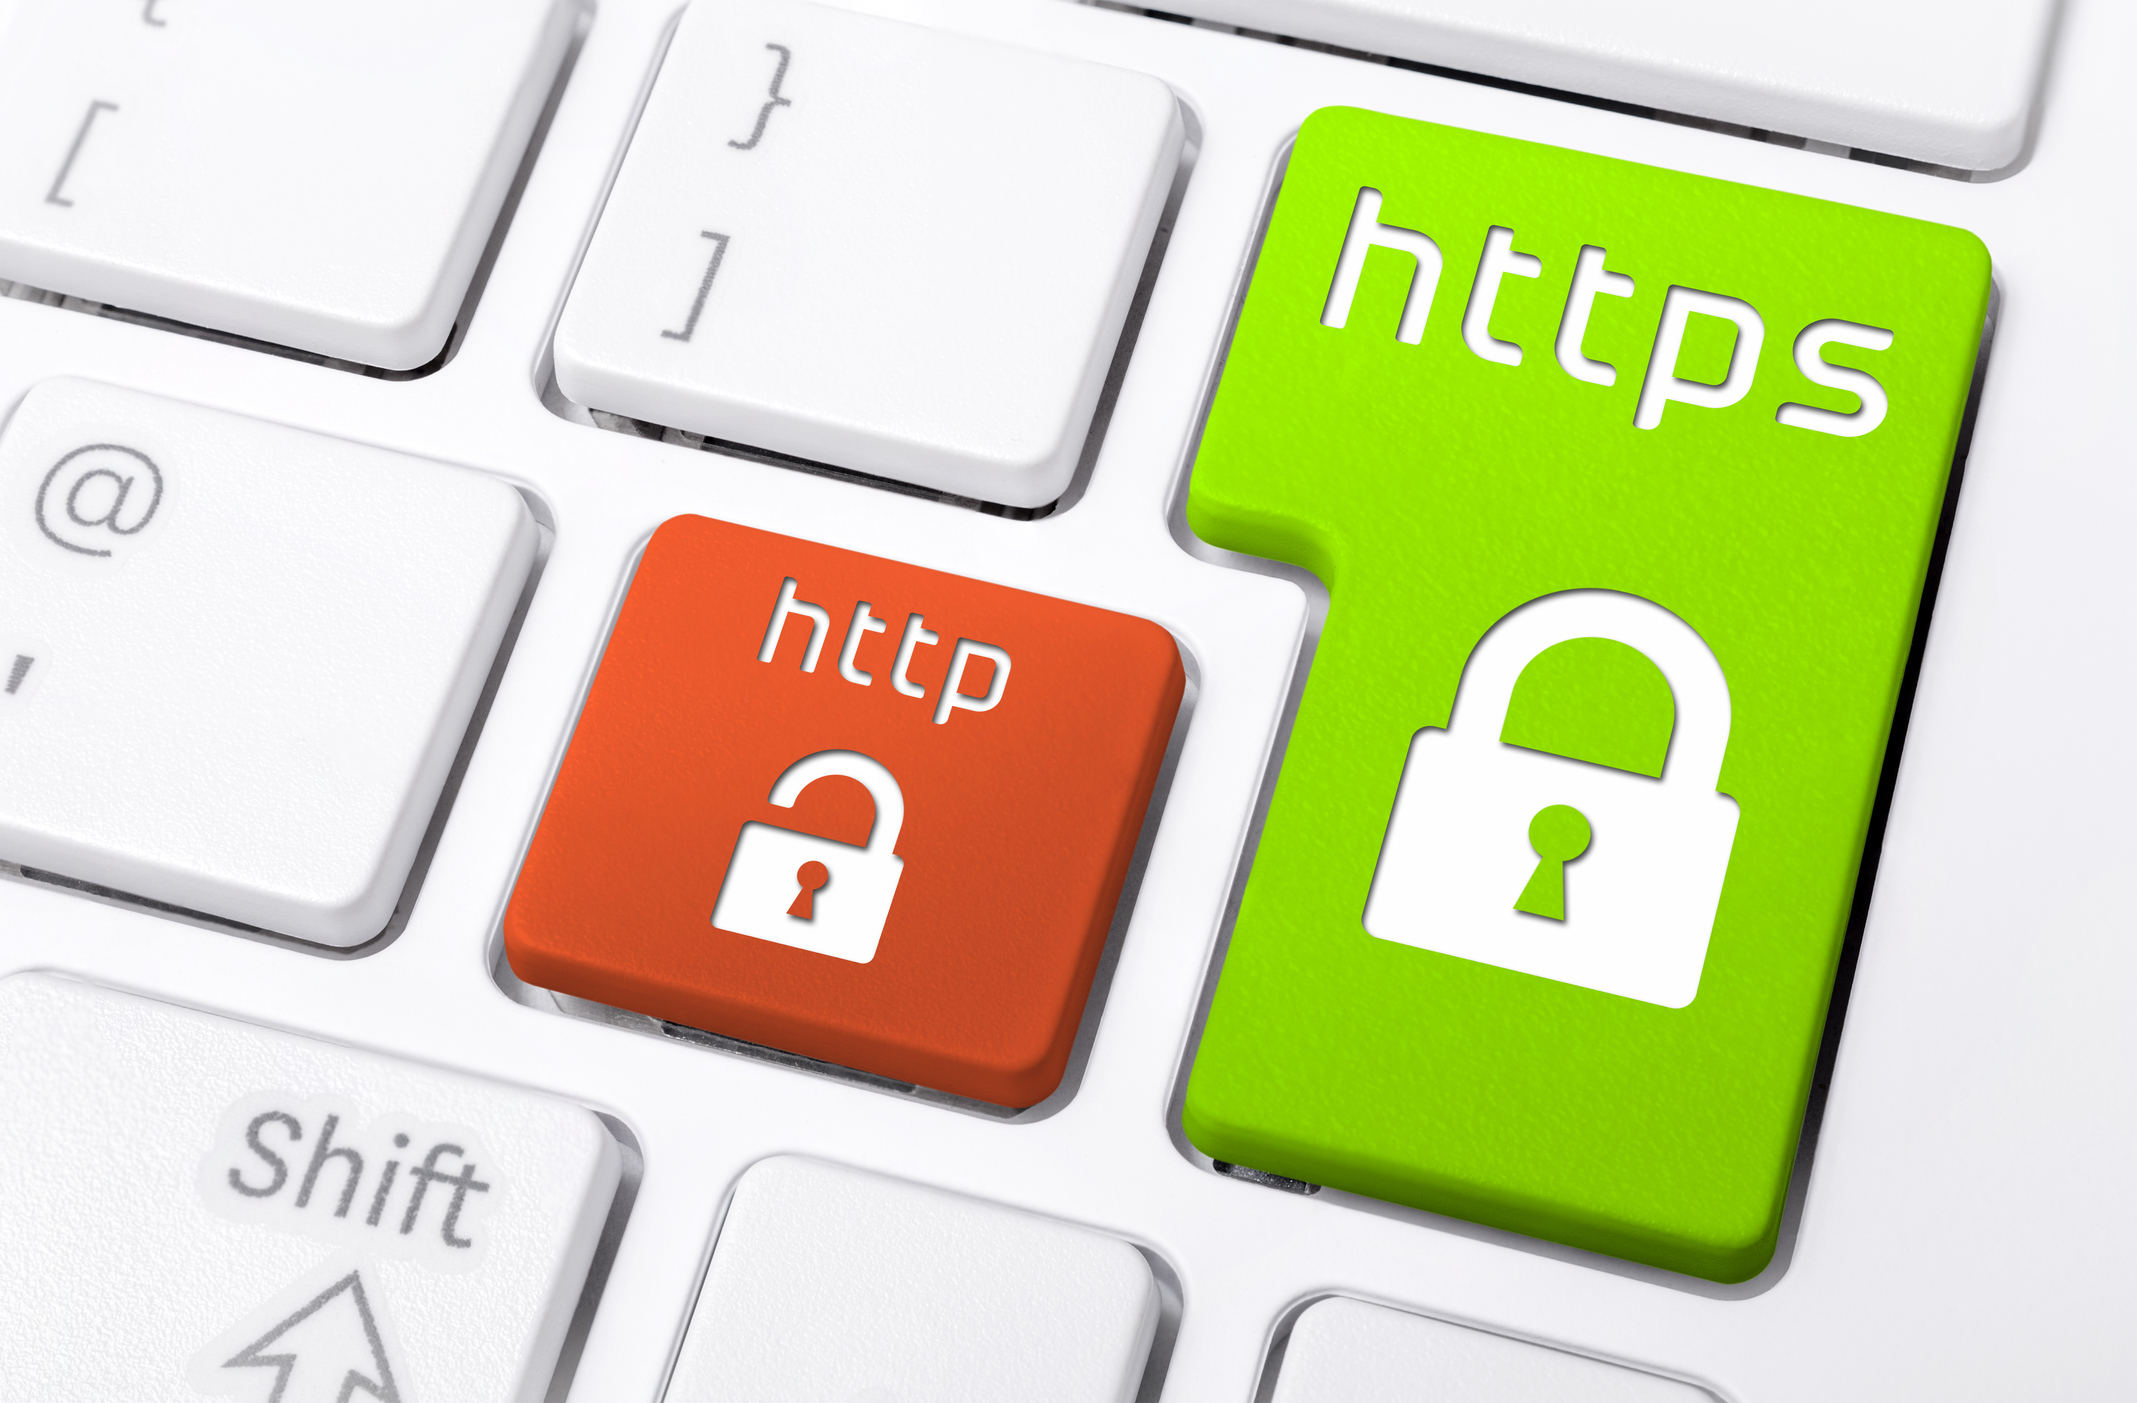 Do I need an SSL certificate for my website?